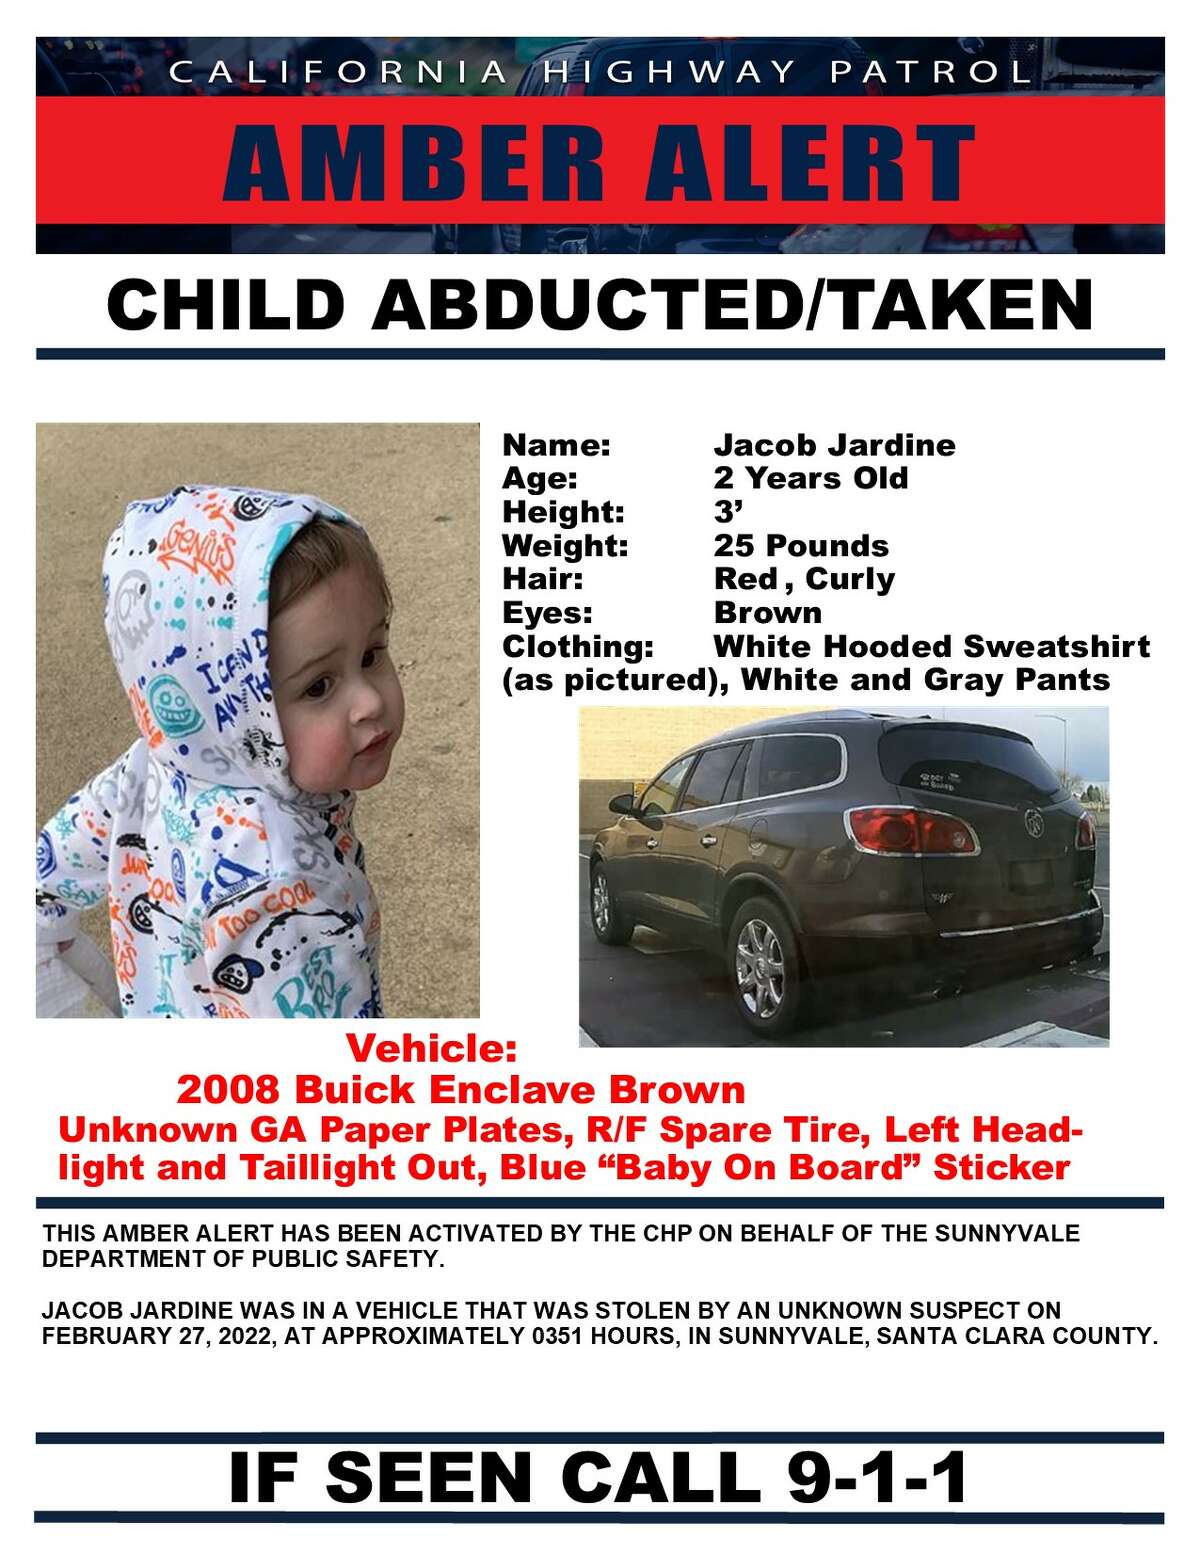 An Amber Alert was issued early Feb. 27 for a missing toddler named Jacob Jardine.